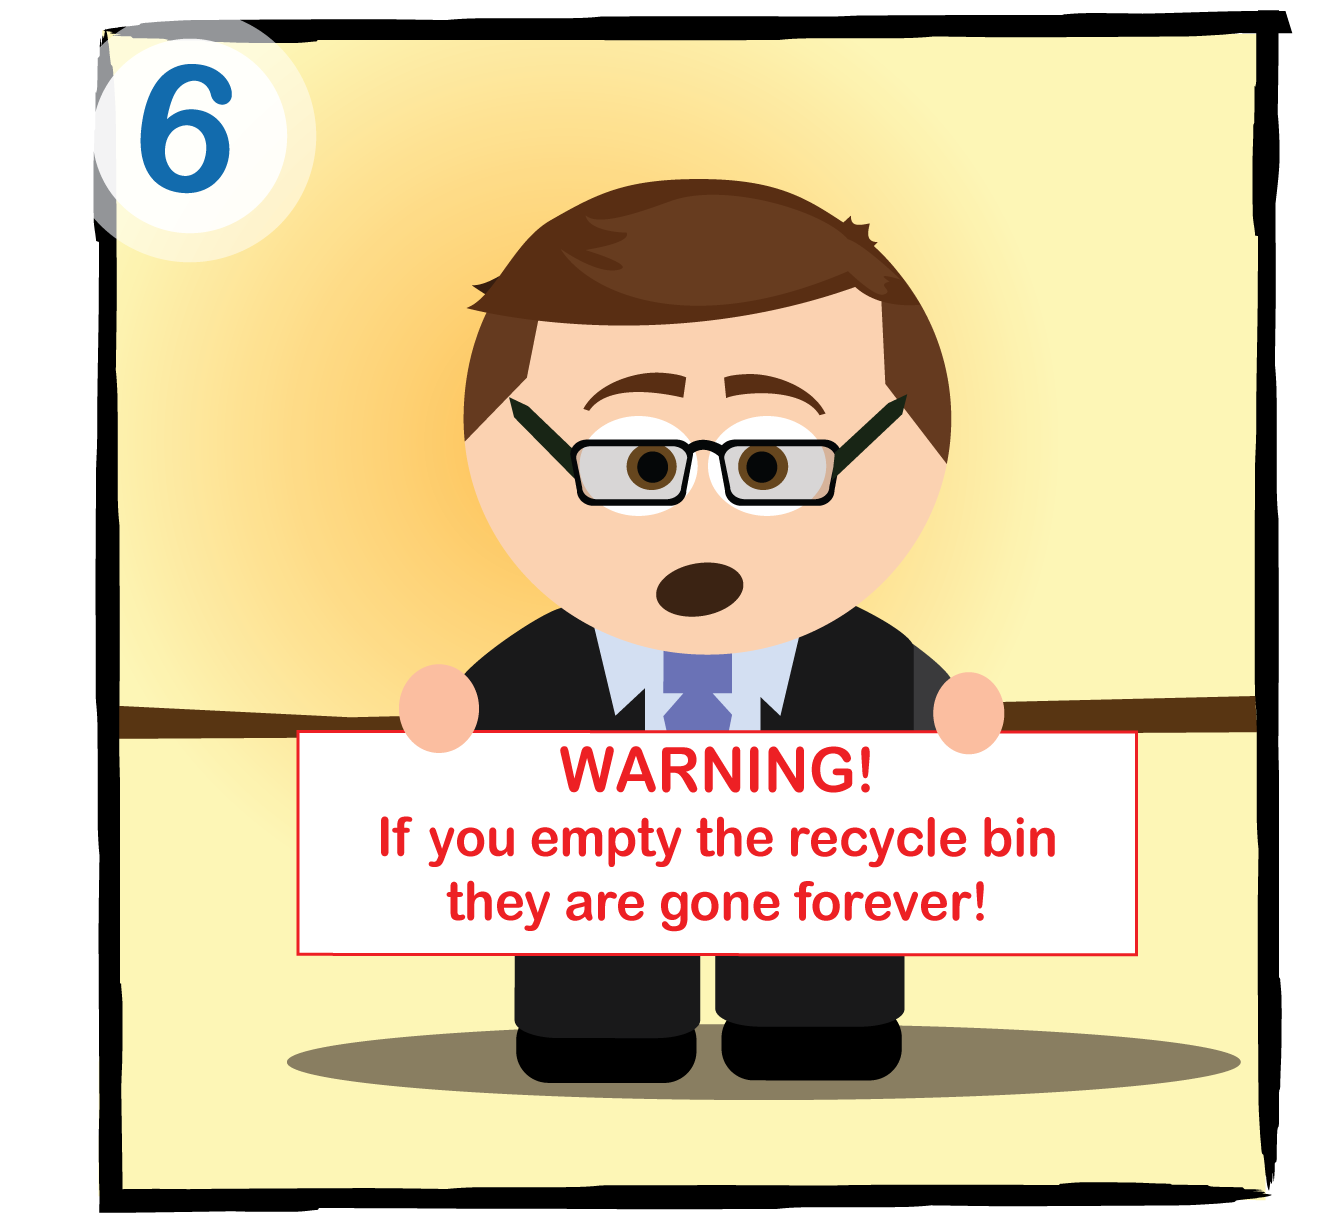 Warning! If you empty the recycle bin they are gone forever